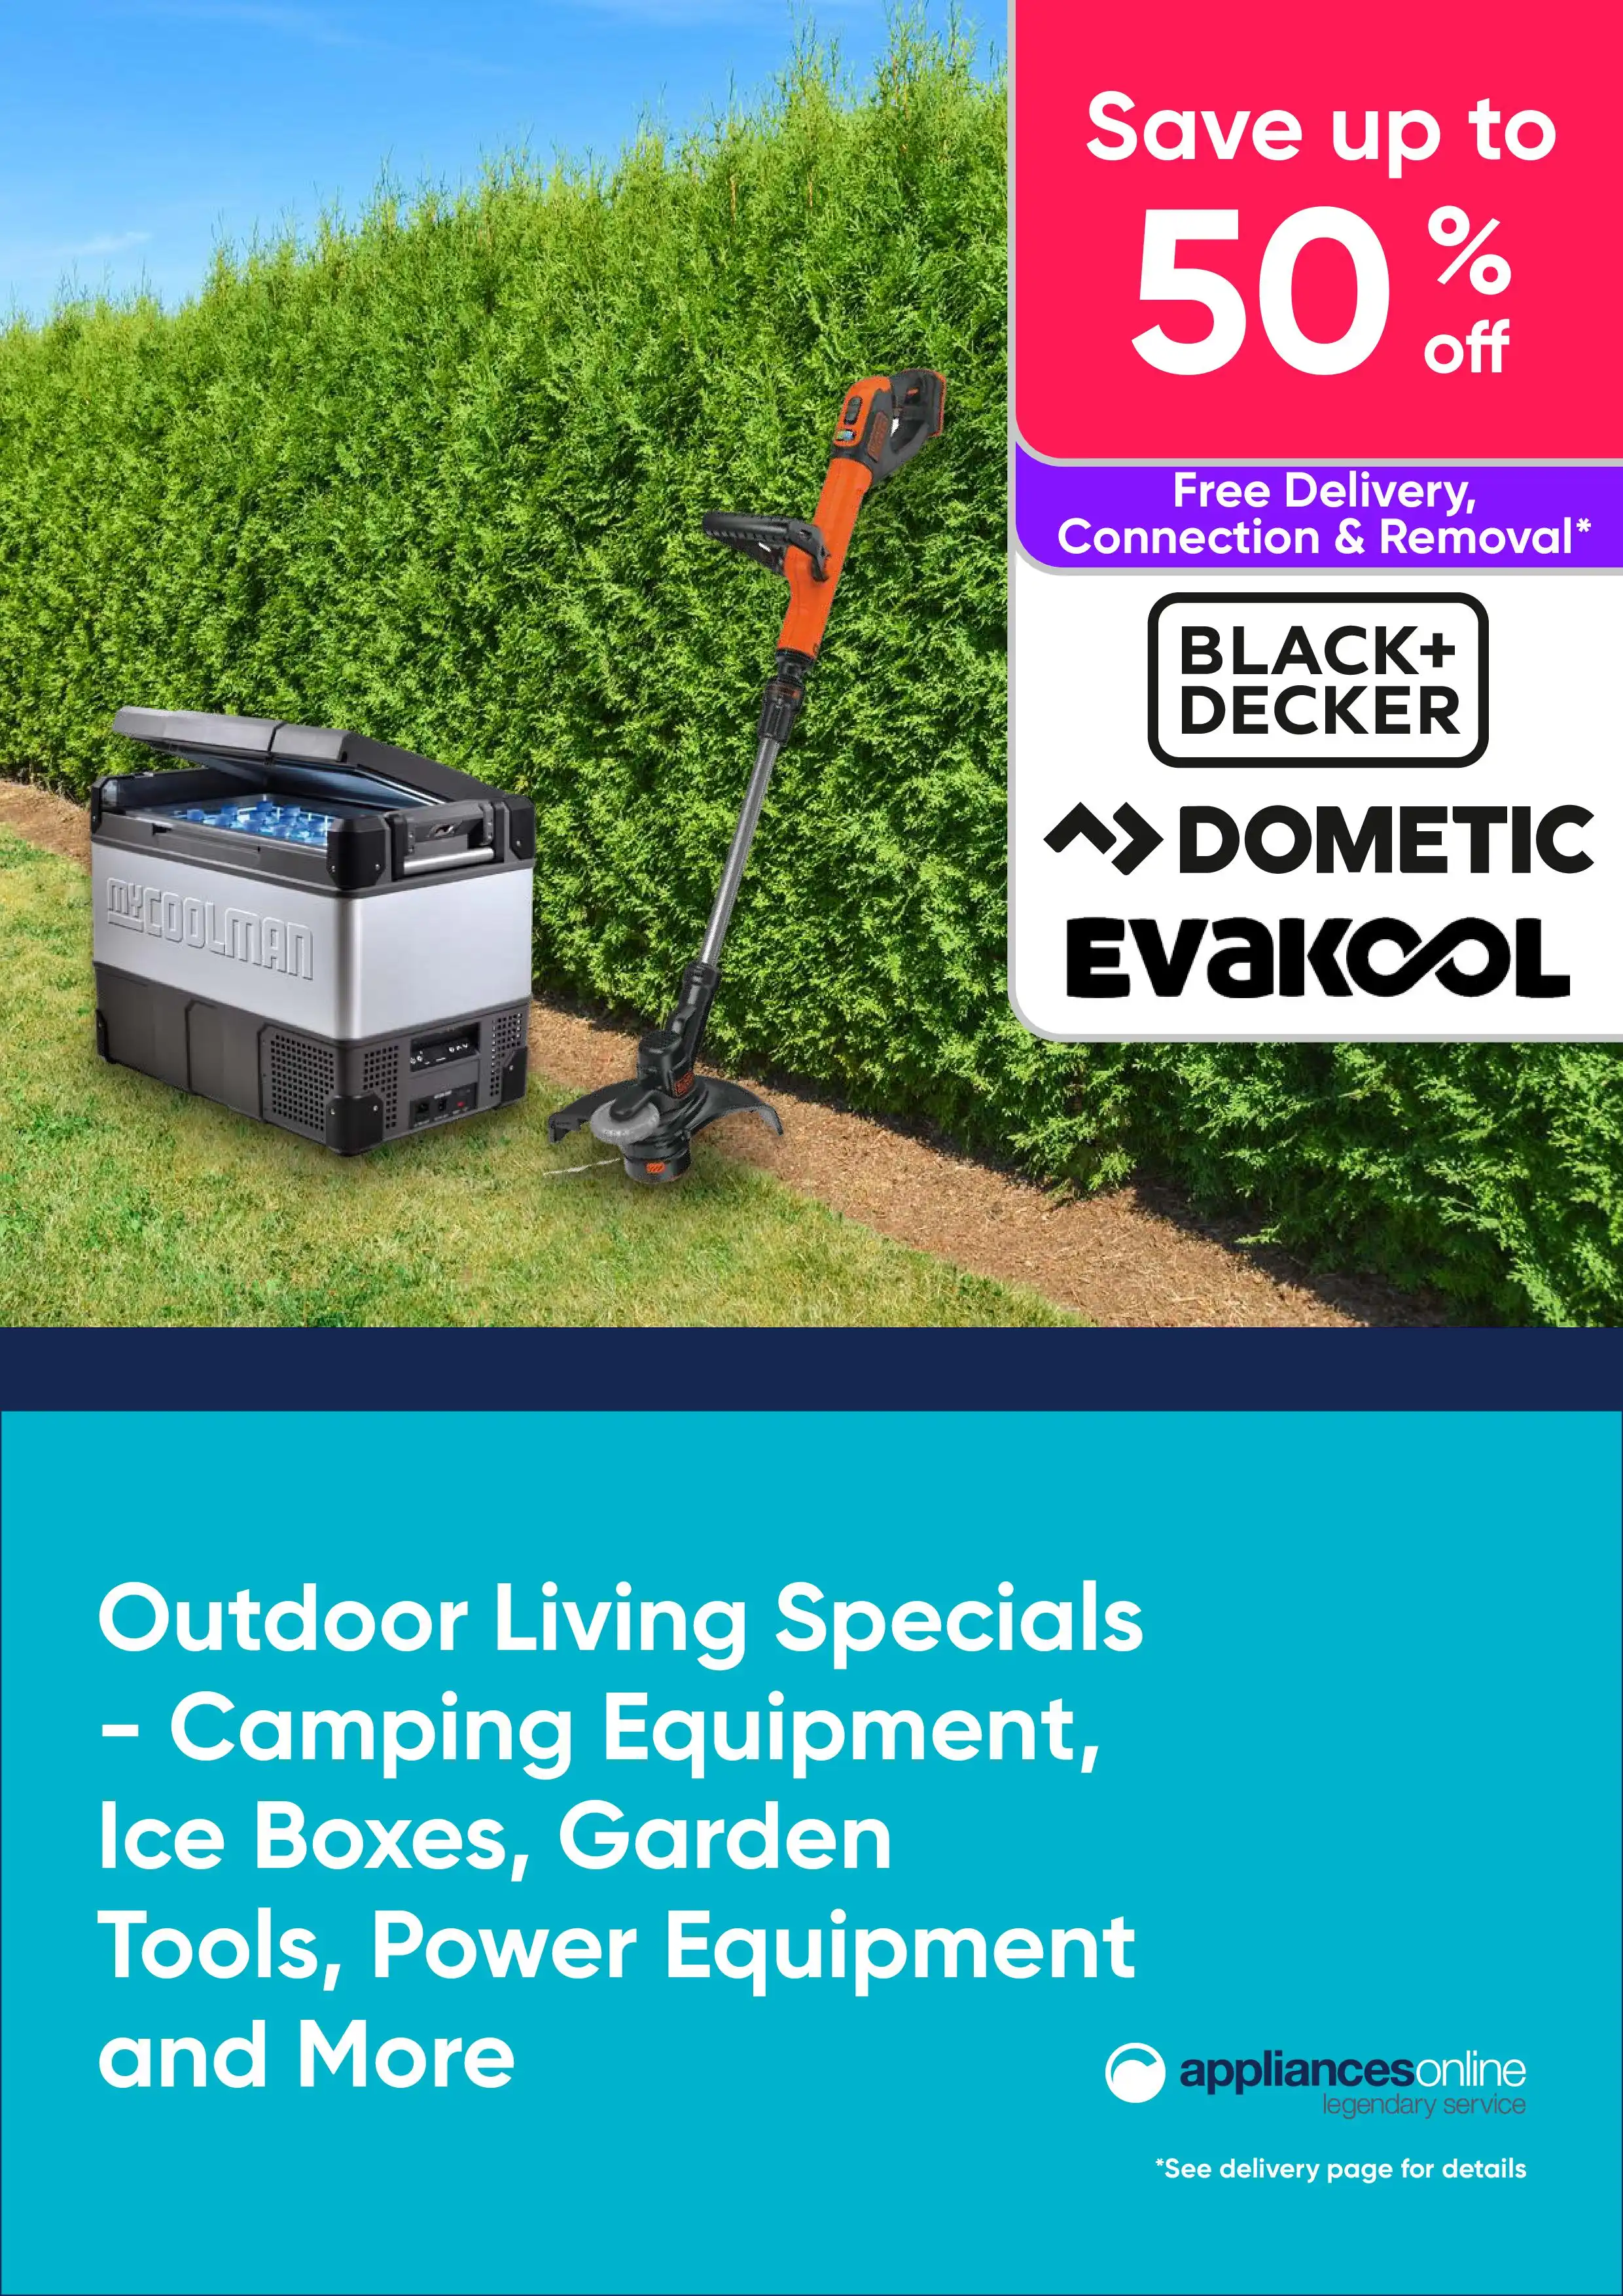 Appliances Online Outdoor Living Specials - Save Up to 50% RRP On Camping Equipment and More